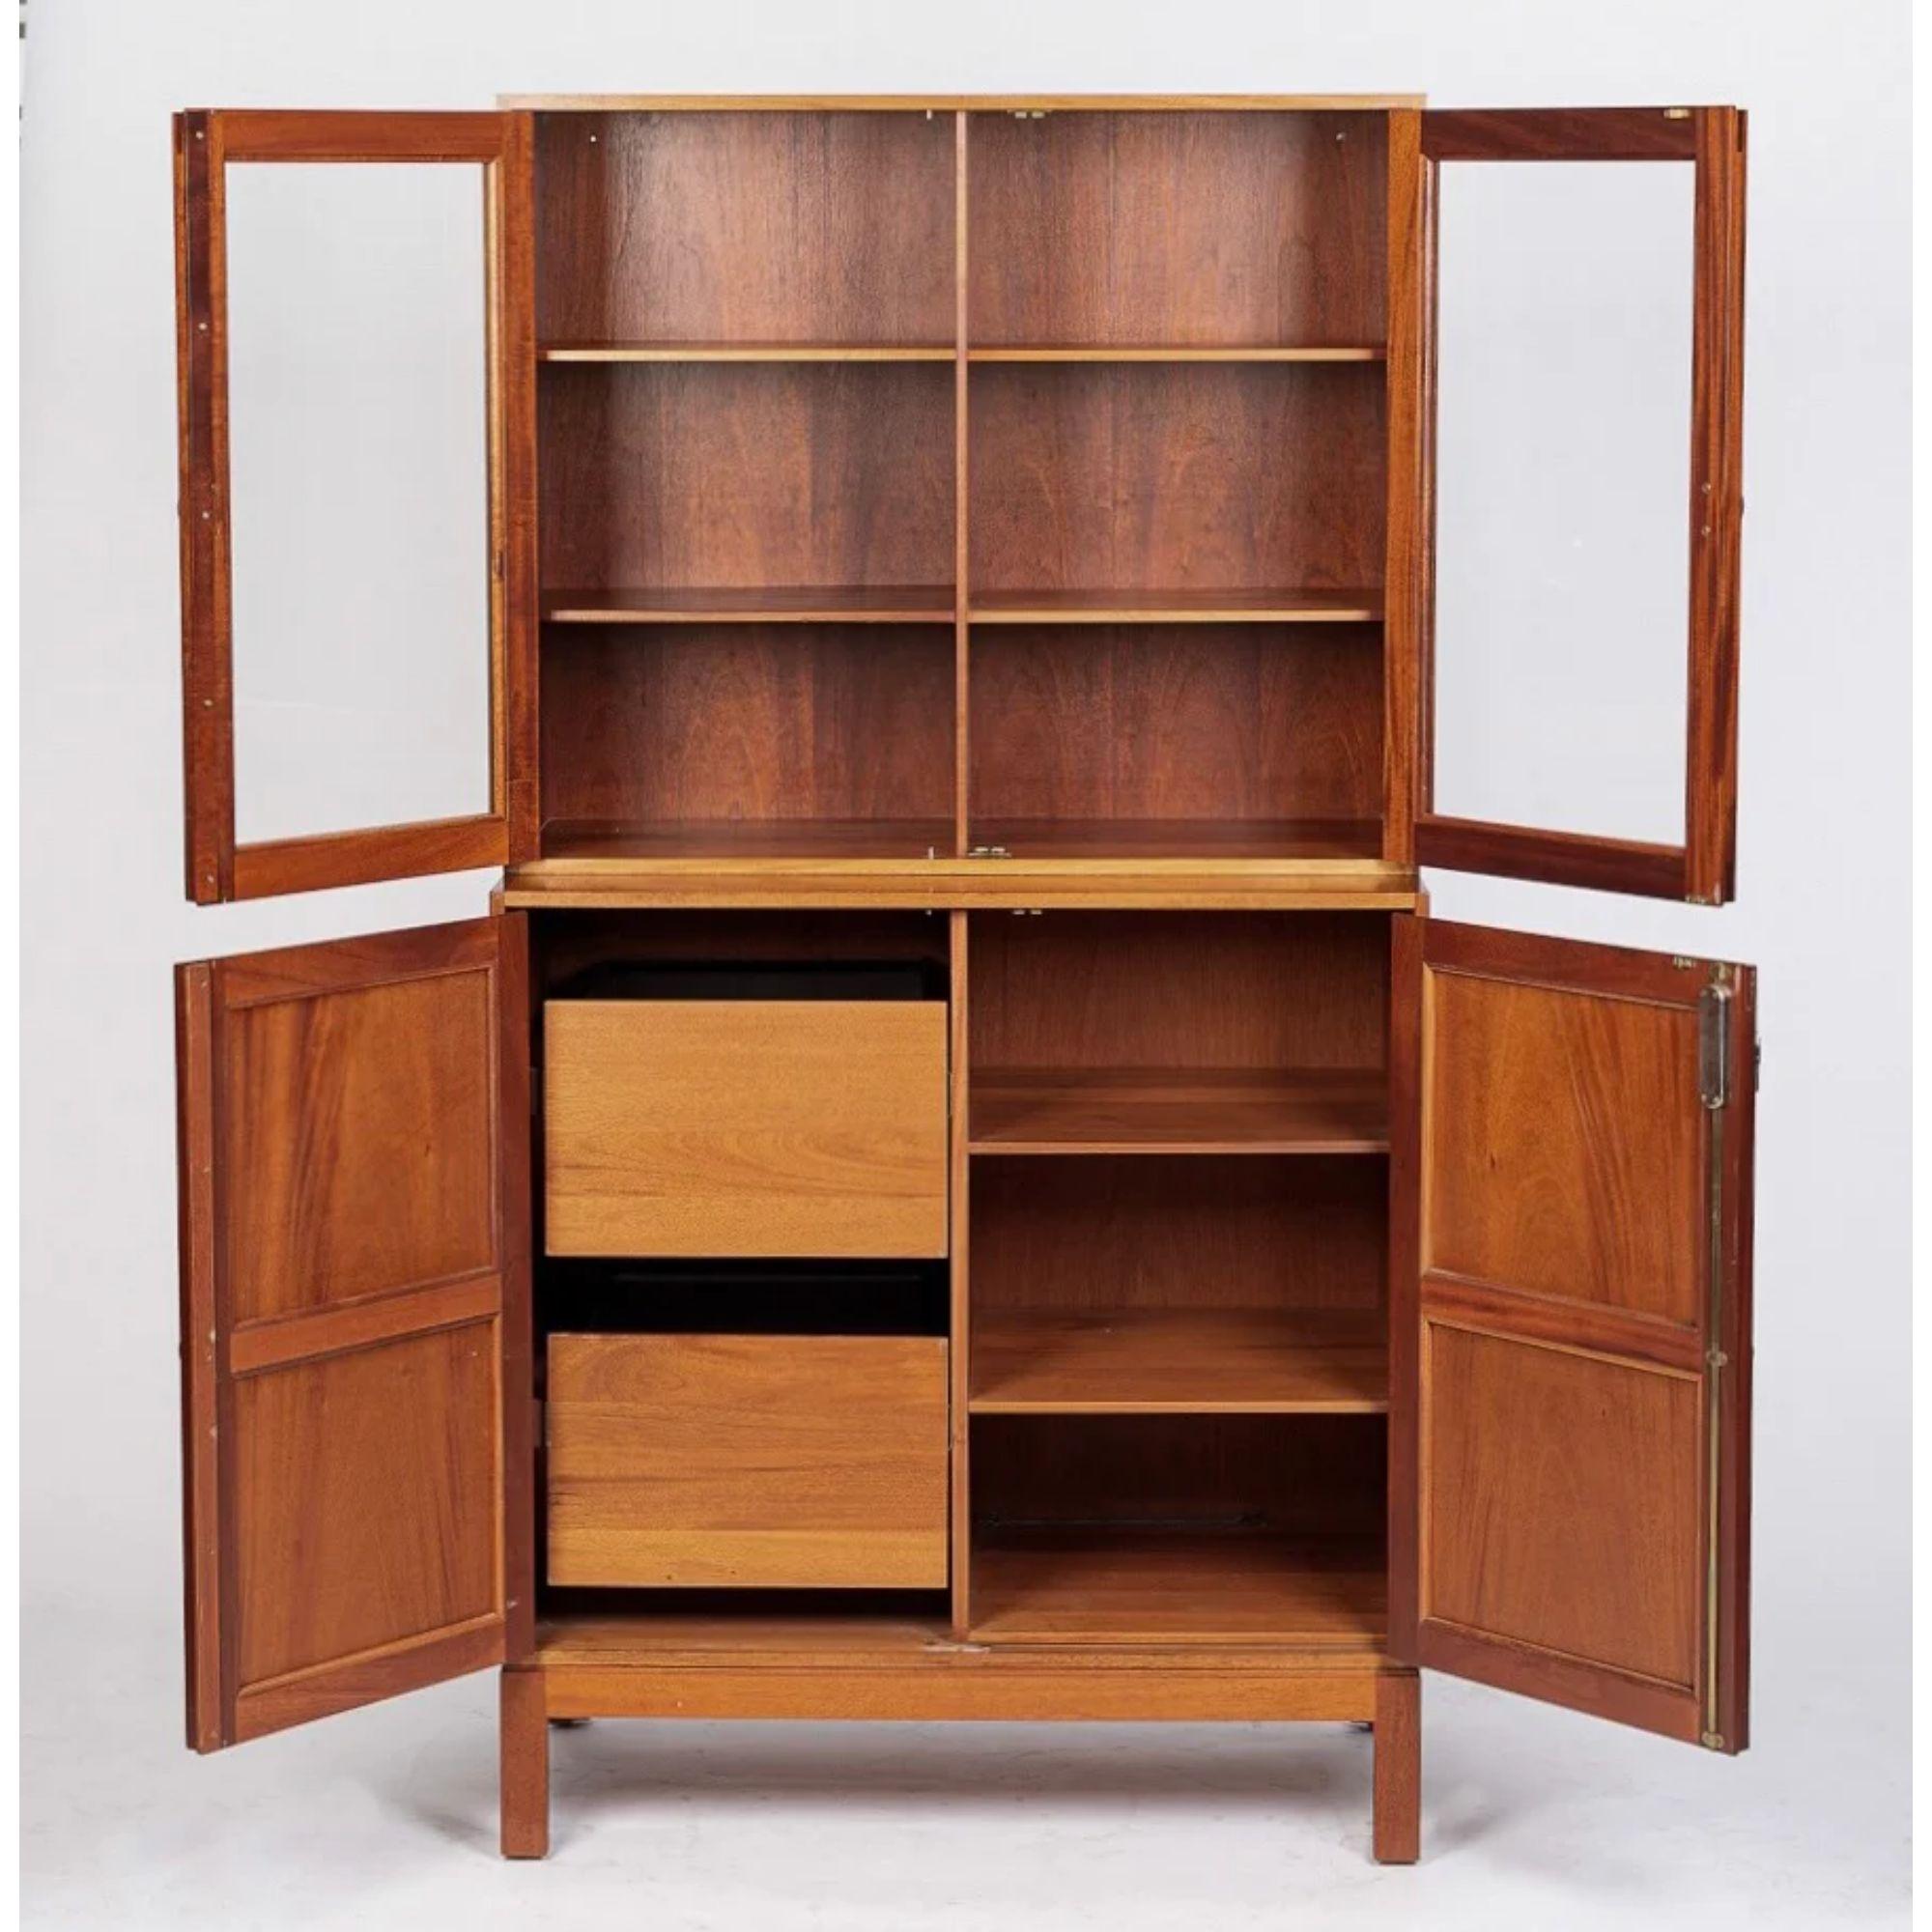 20th Century Midcentury Danish Wood Storage Cabinets with Glass Doors & File Drawer